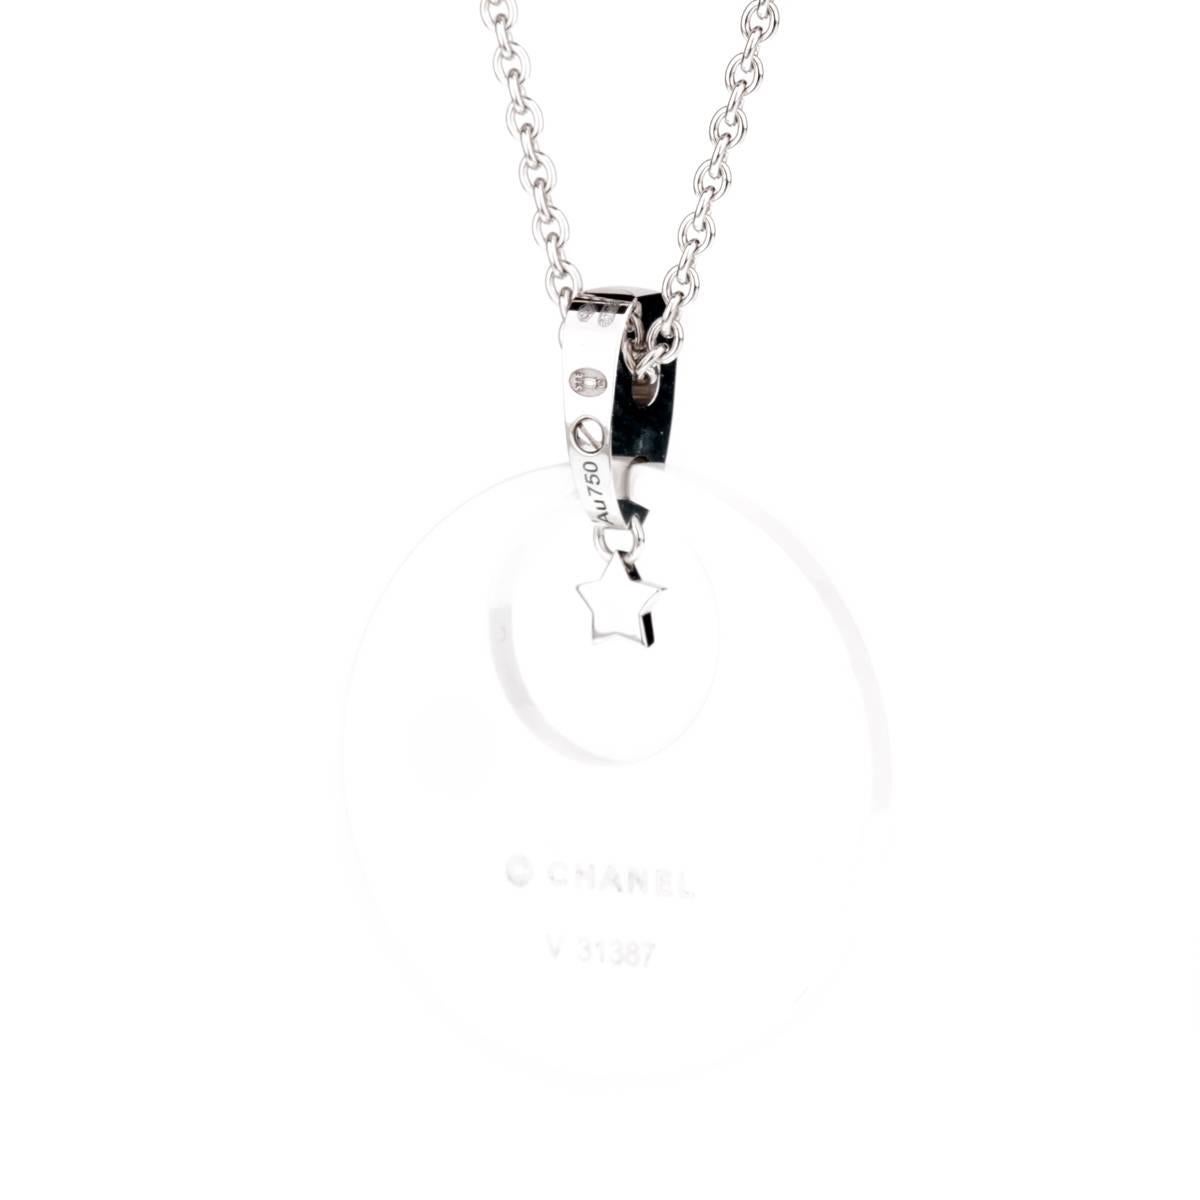 An iconic Chanel necklace from the Comete collection featuring a dazzling display of round brilliant cut diamonds set in 18k white gold and ceramic.

Necklace Length: 16